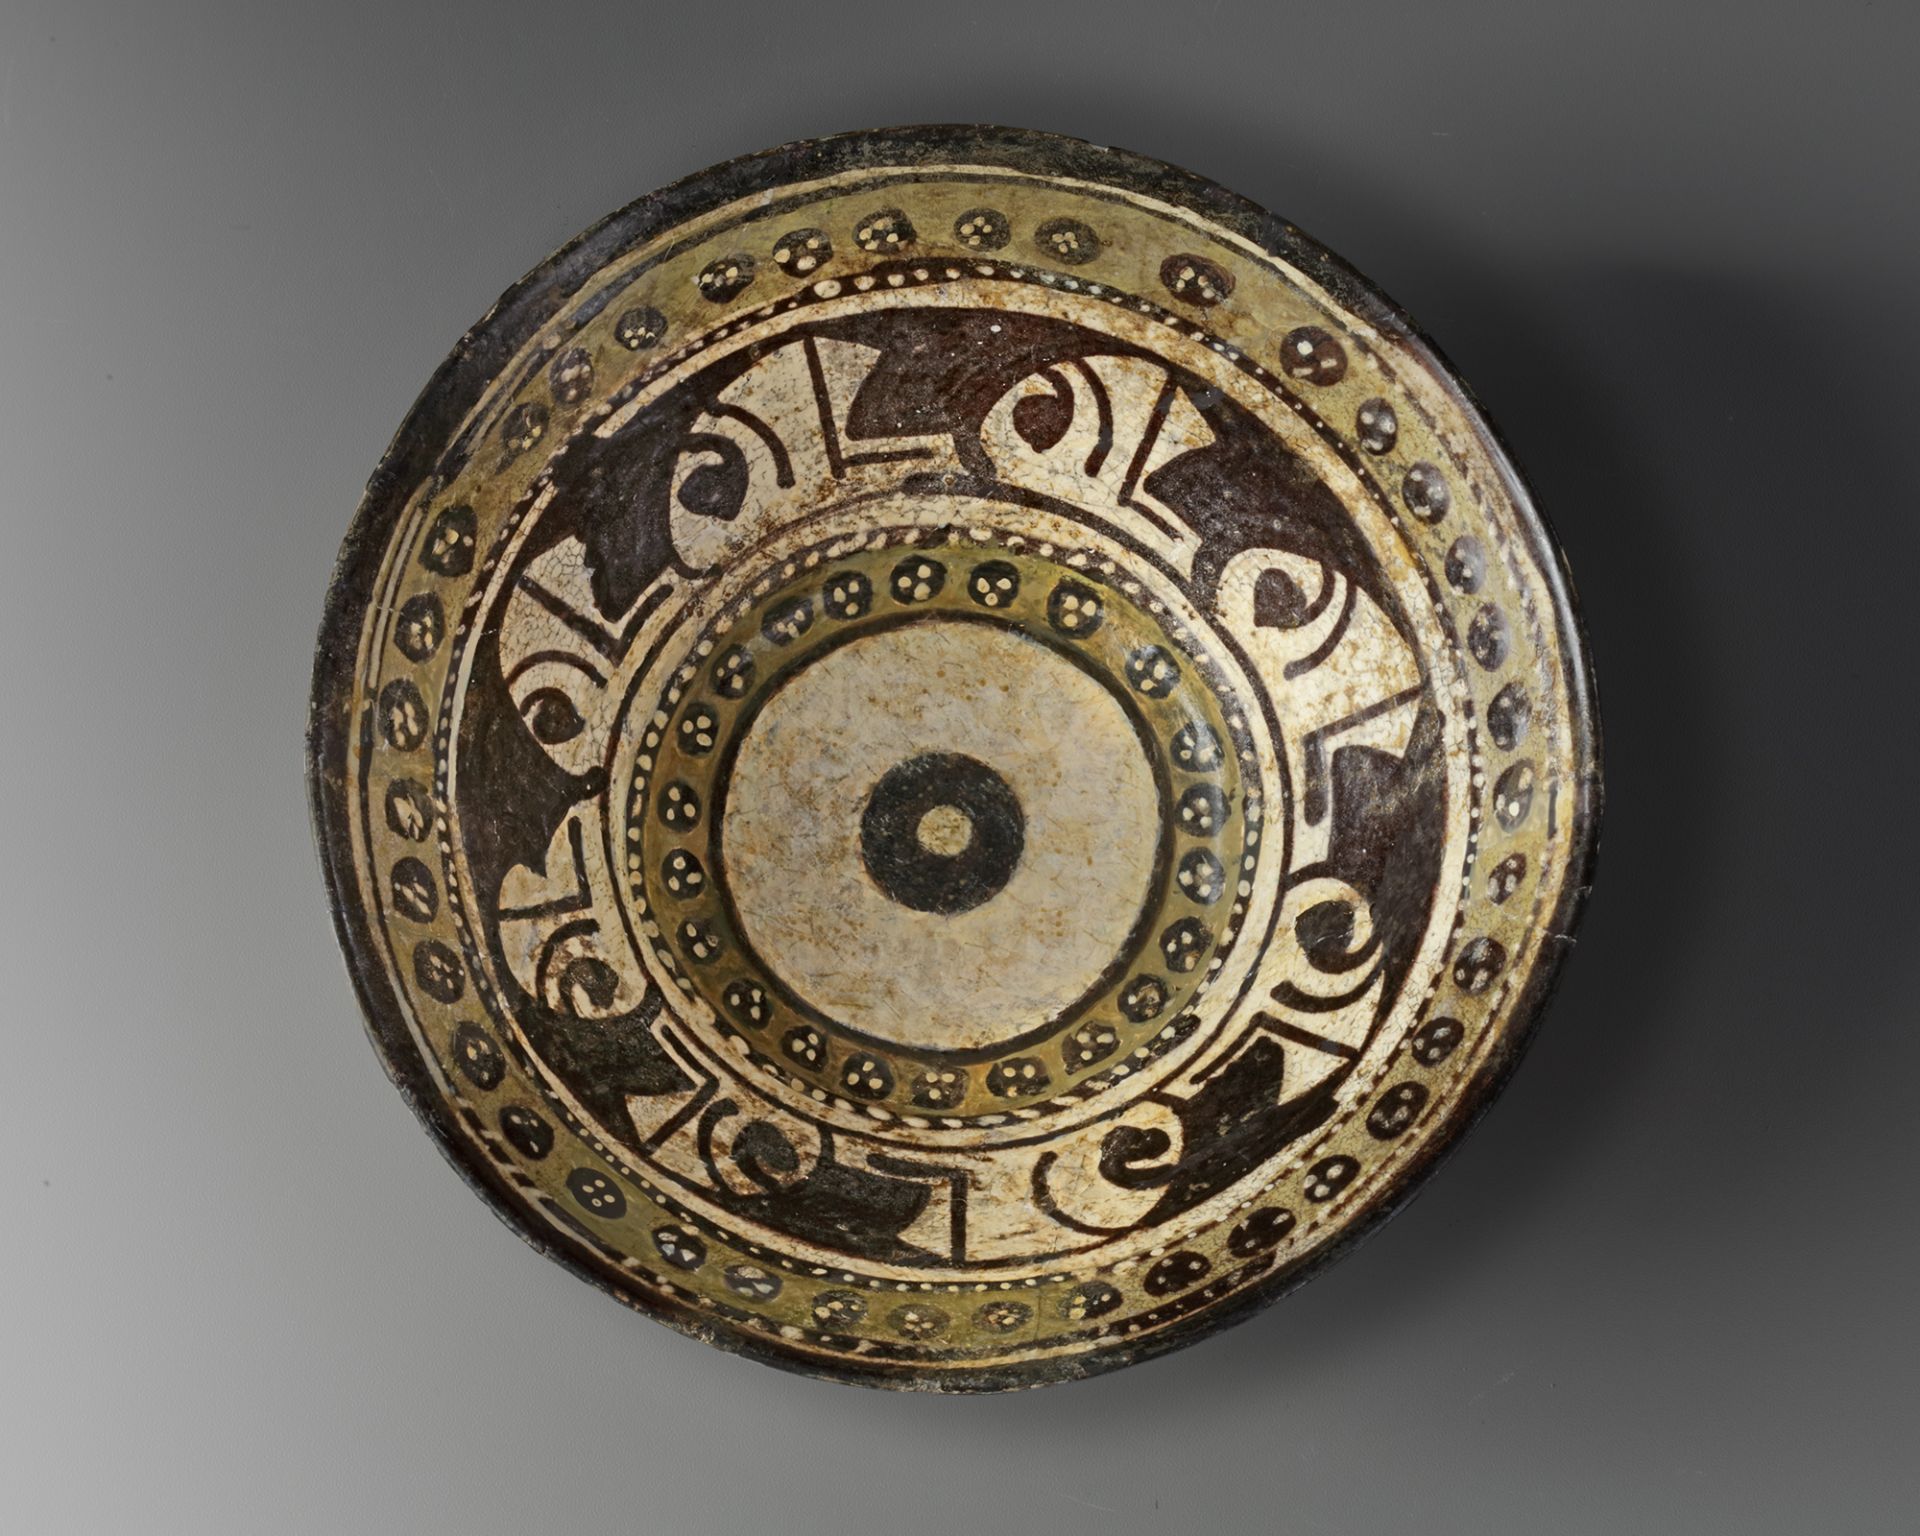 A NISHAPUR CONICAL POTTERY BOWL, PERSIA, LATE 9TH-EARLY 10TH CENTURY